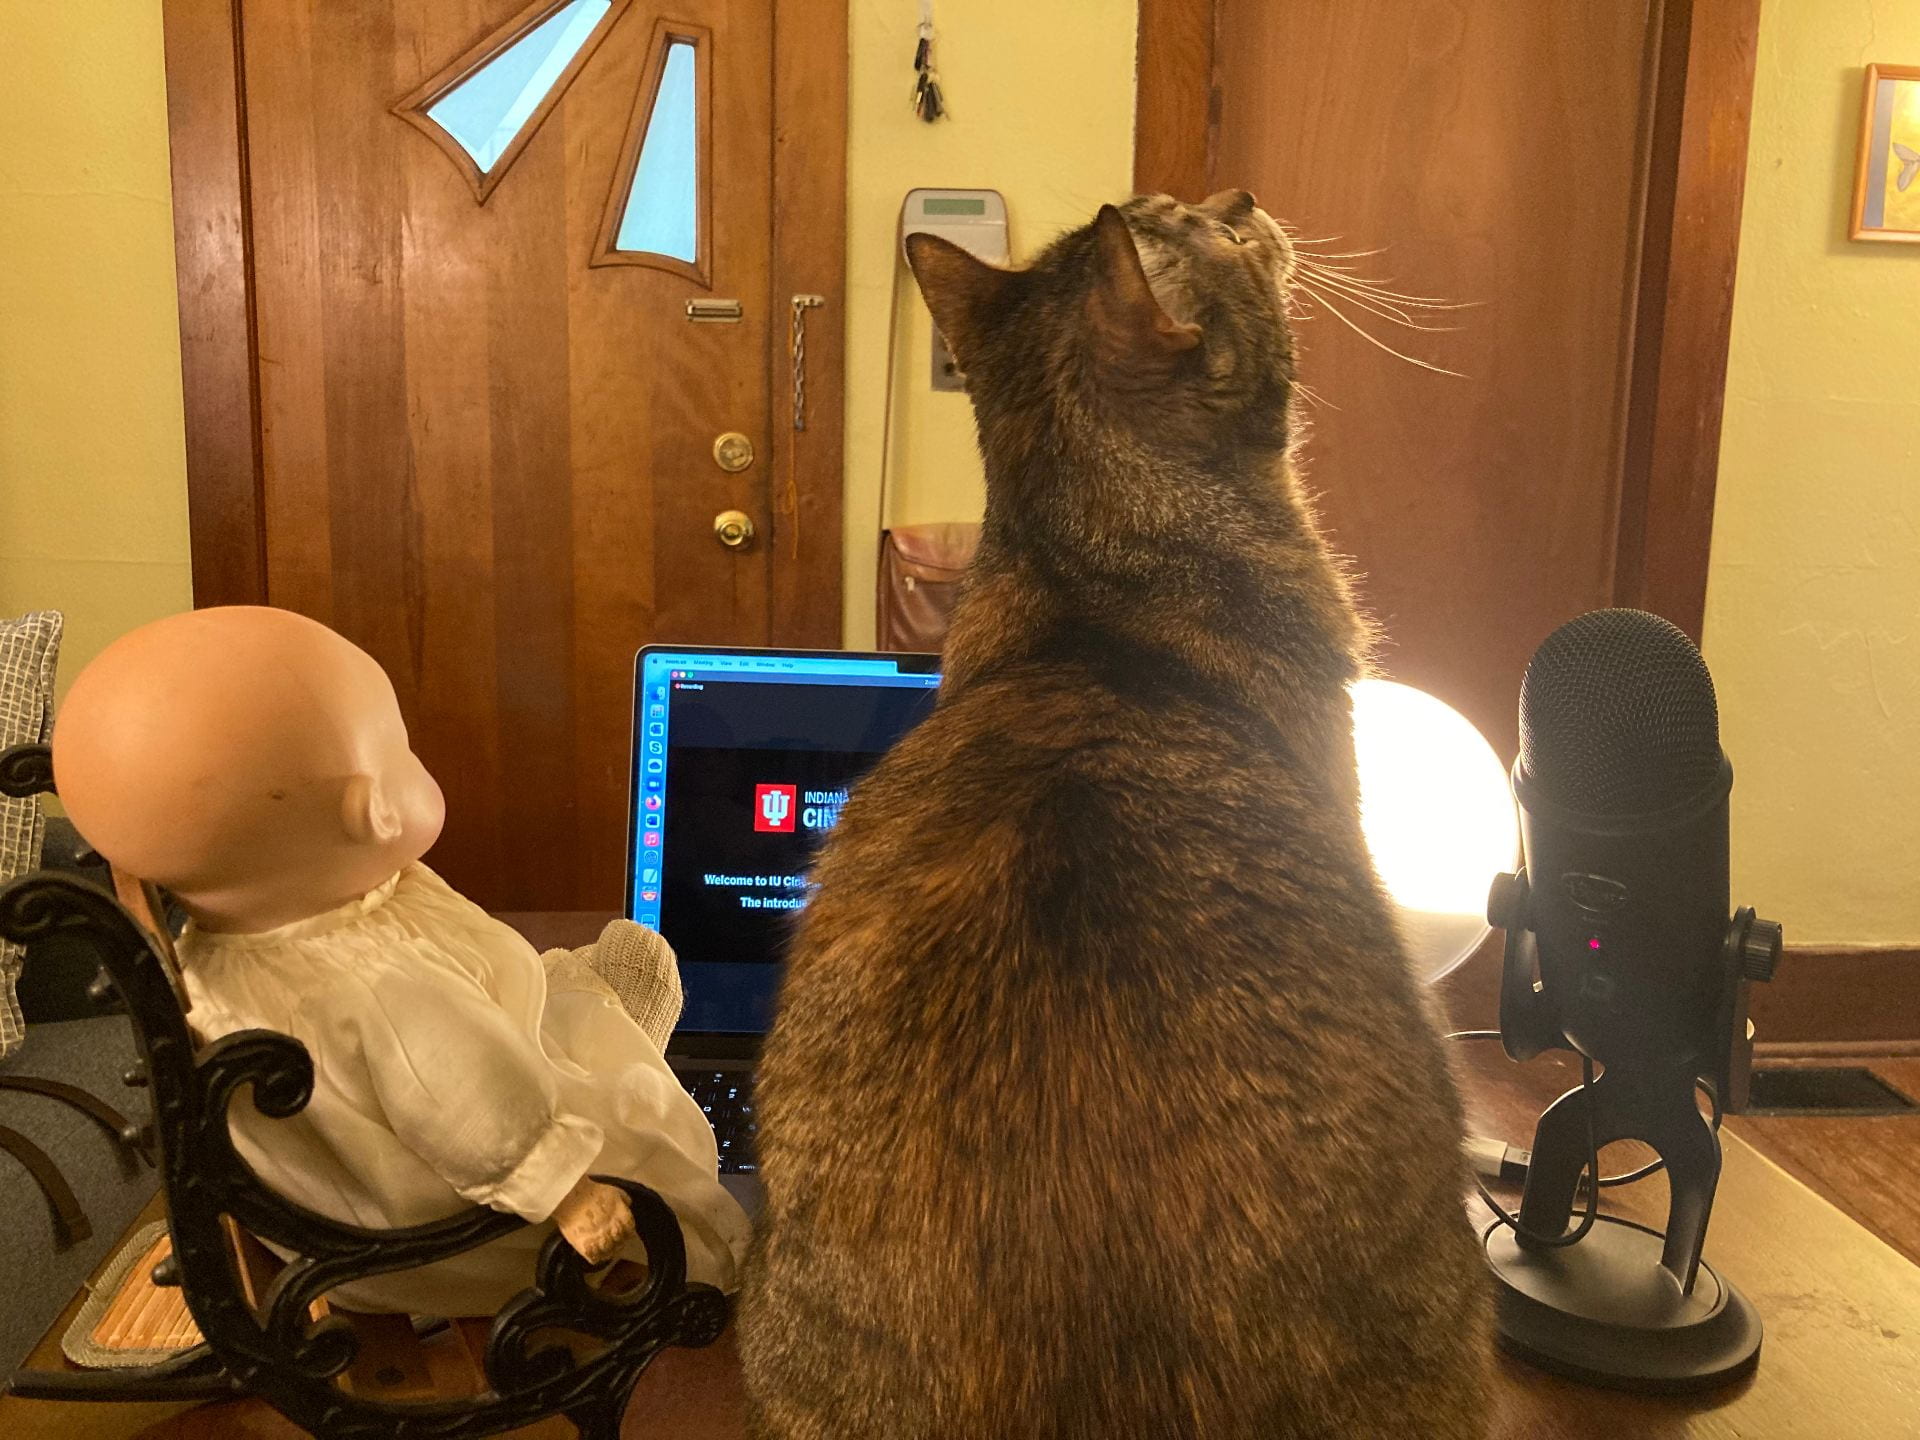 a brown tabby sits in front of a laptop and microphone. An antique babydoll is in a mini rocking chair next to the cat.